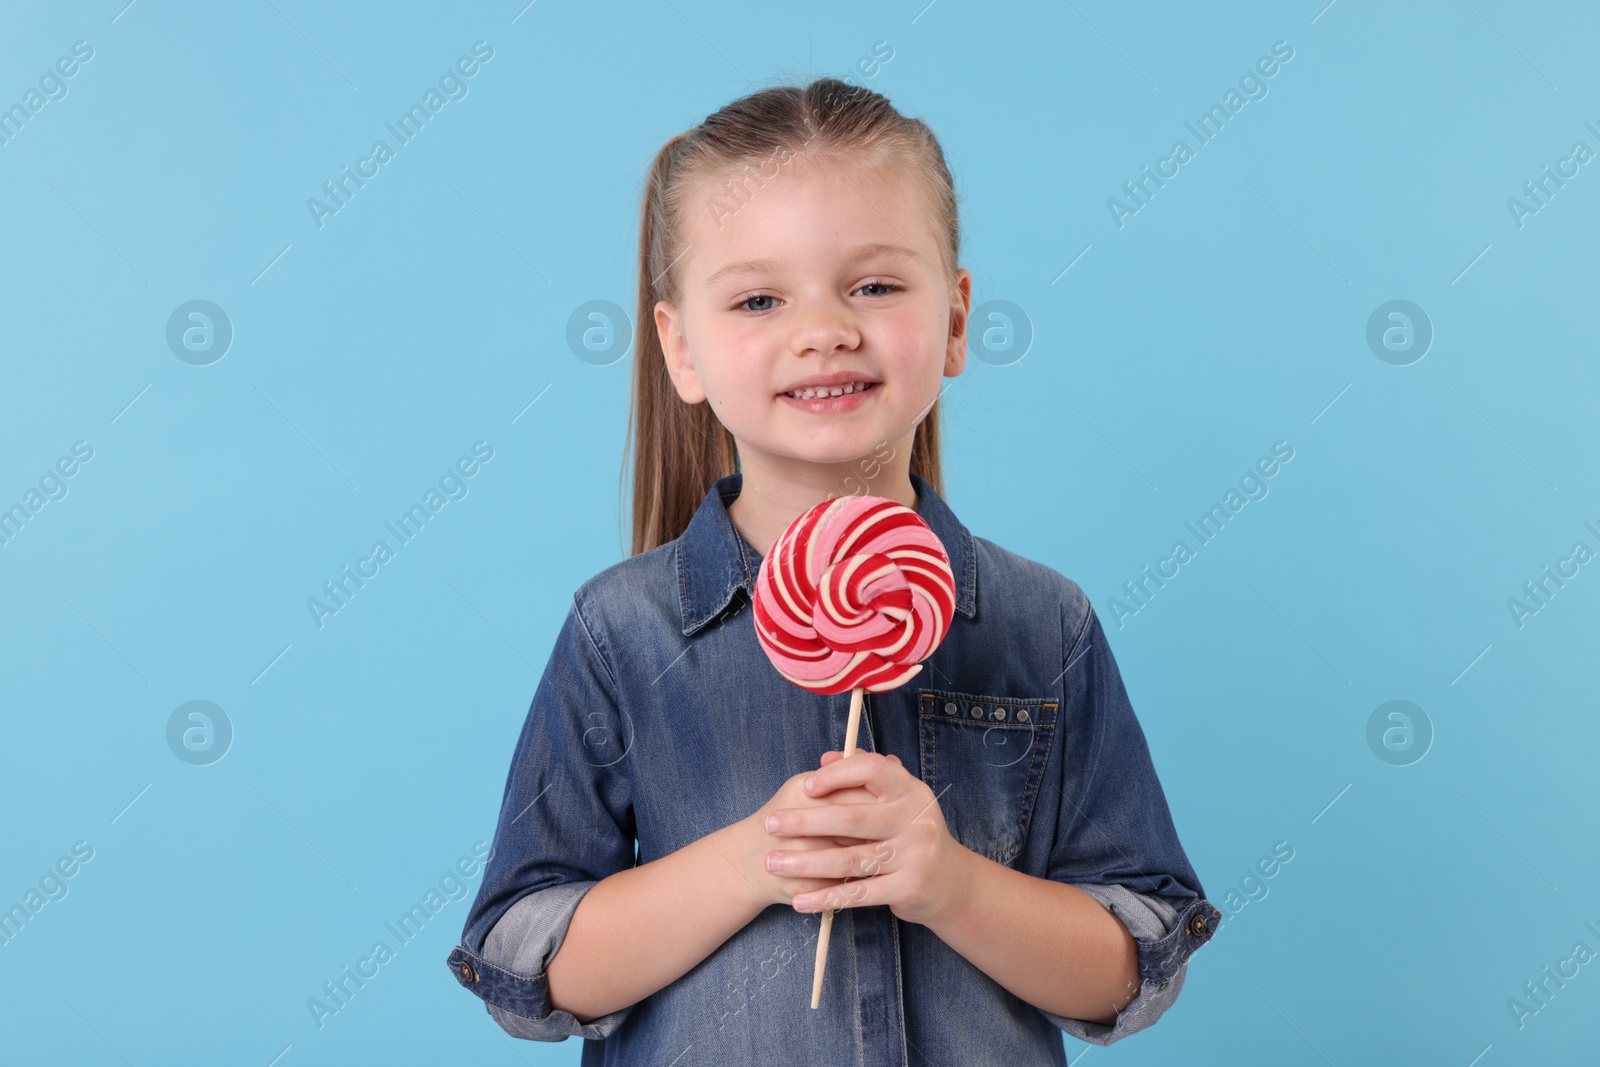 Photo of Happy little girl with bright lollipop swirl on light blue background